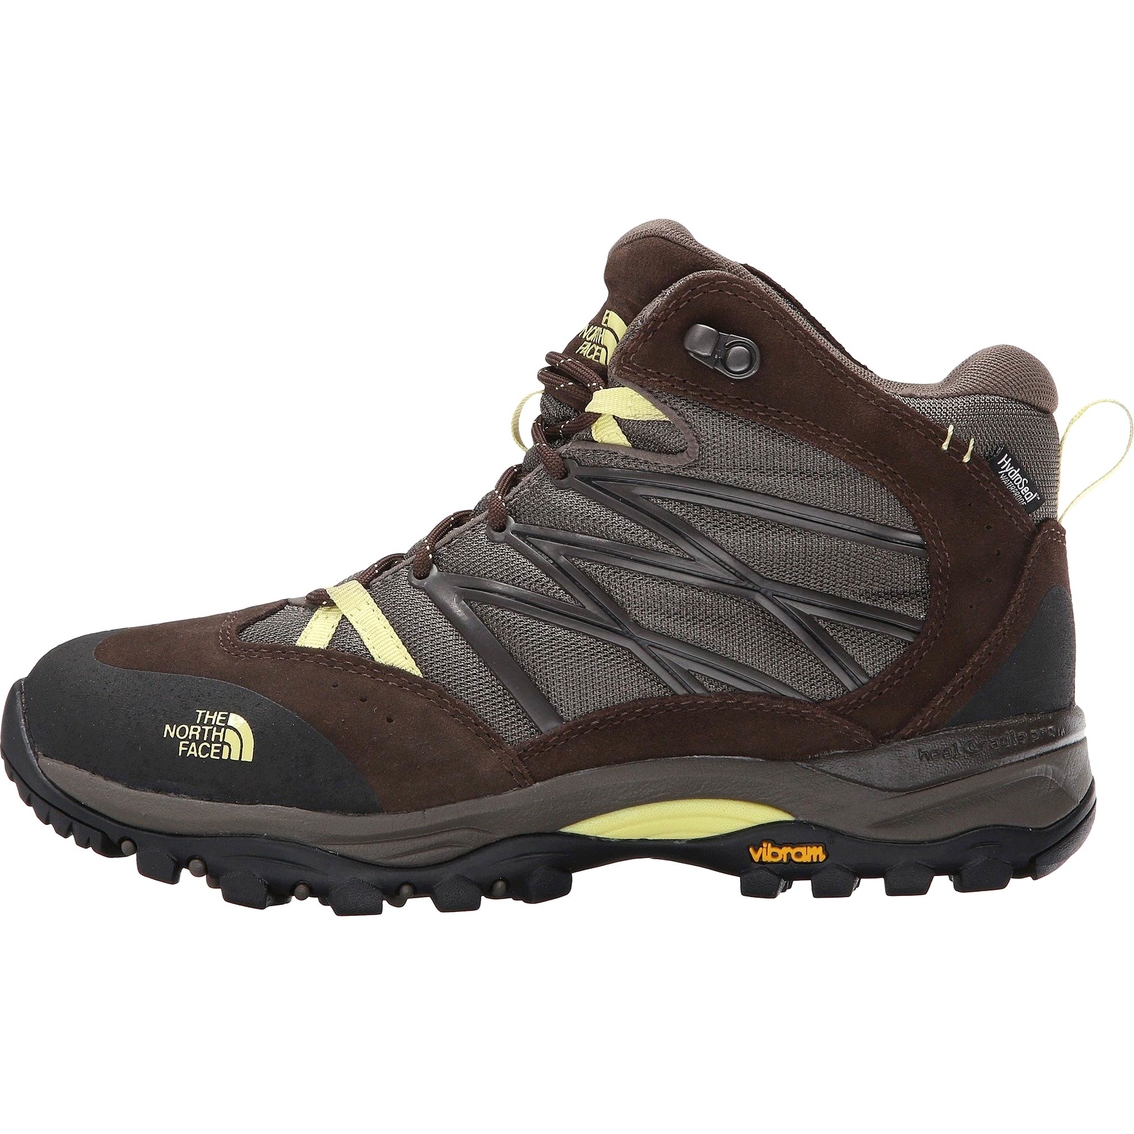 The North Face Women's Storm Ii Mid Hiking Boots | Outdoor | Shoes ...